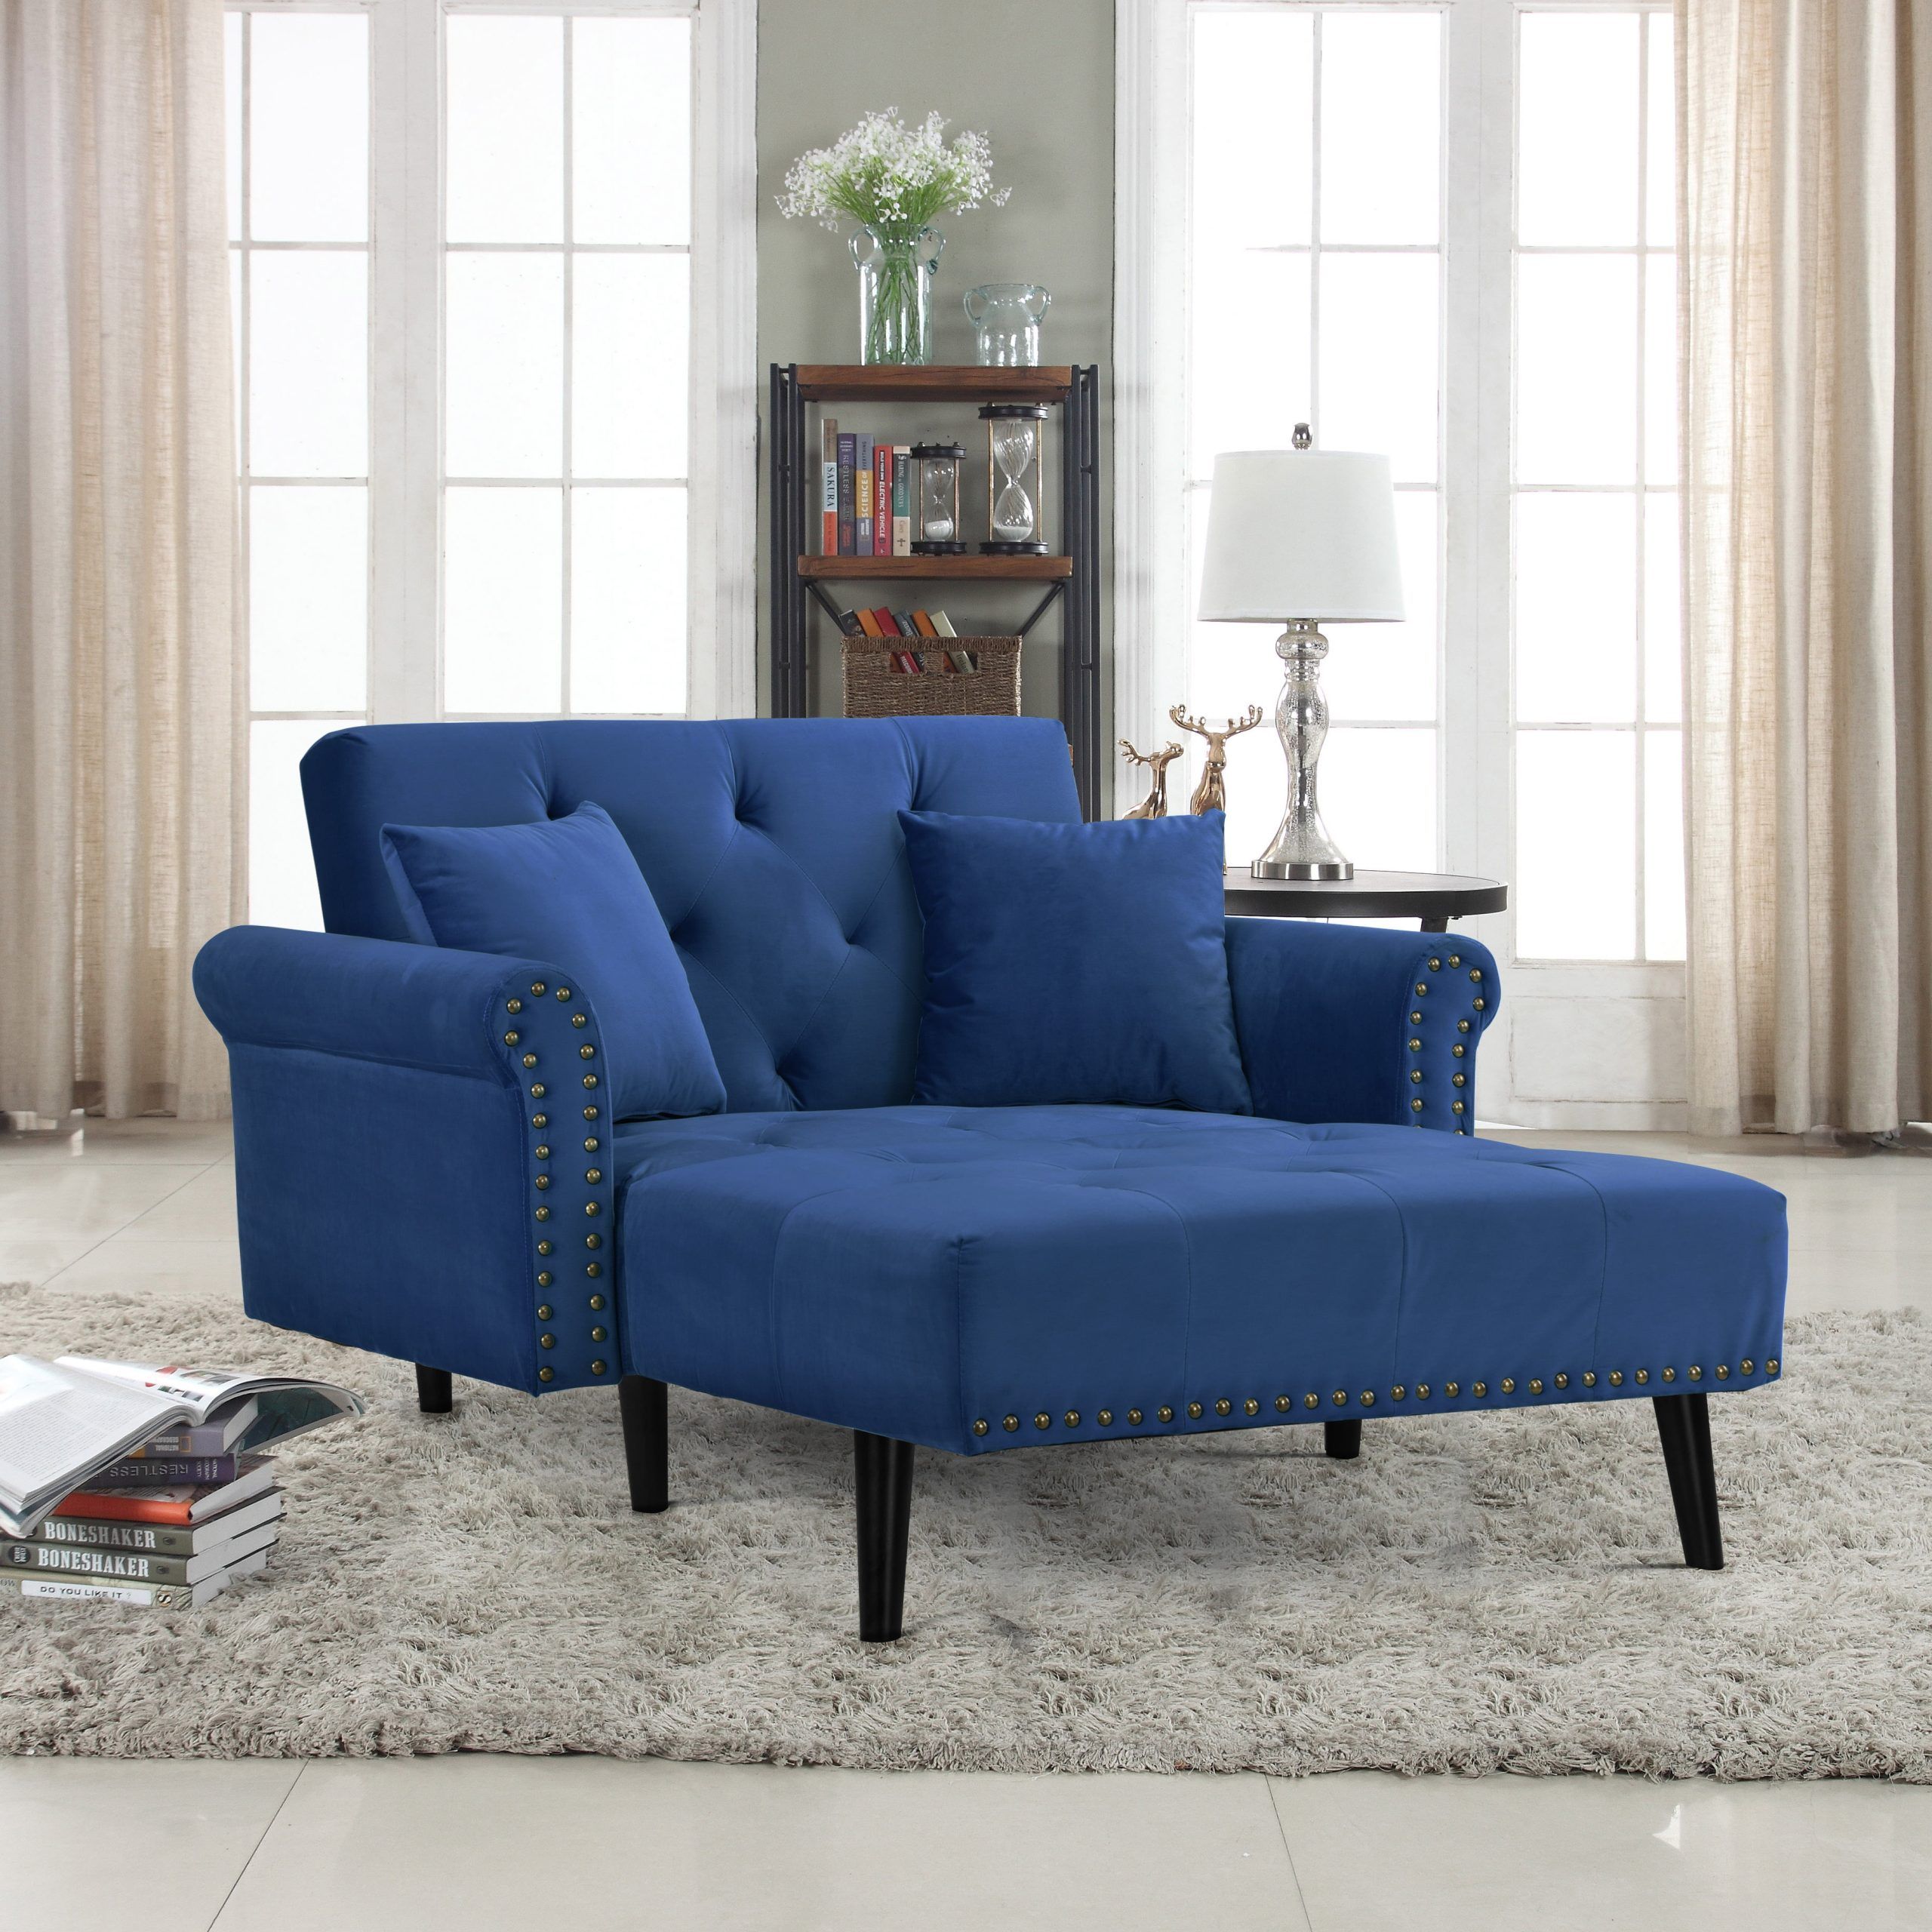 Modern Velvet Fabric Recliner Sleeper Chaise Lounge Futon Sleeper Chair Pertaining To Modern Velvet Sofa Recliners With Storage (View 6 of 20)